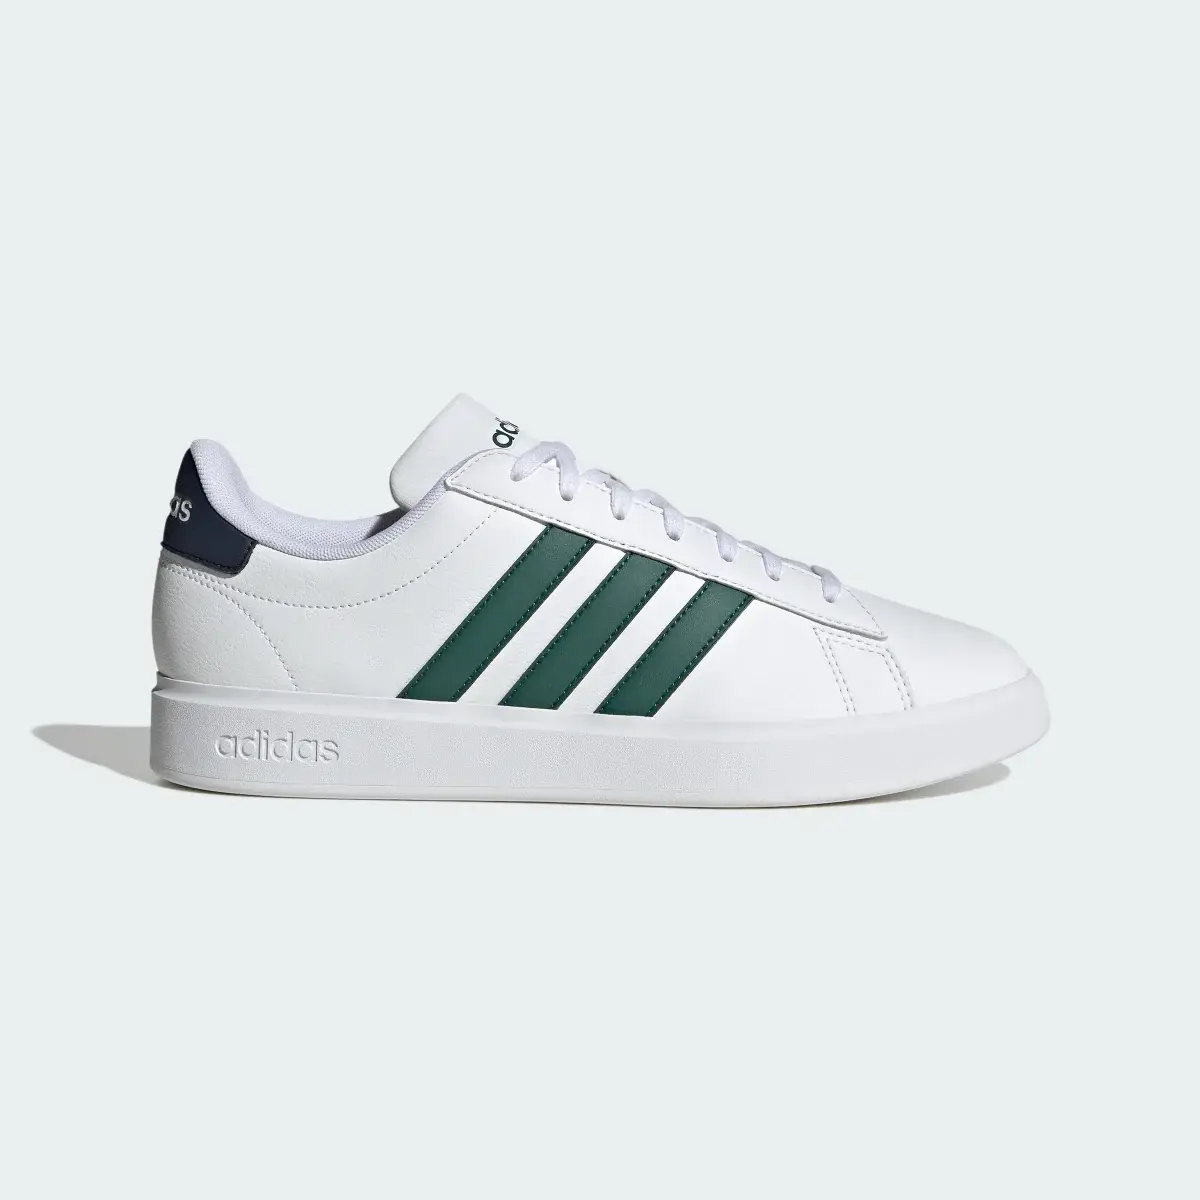 Adidas Grand Court Shoes. 2